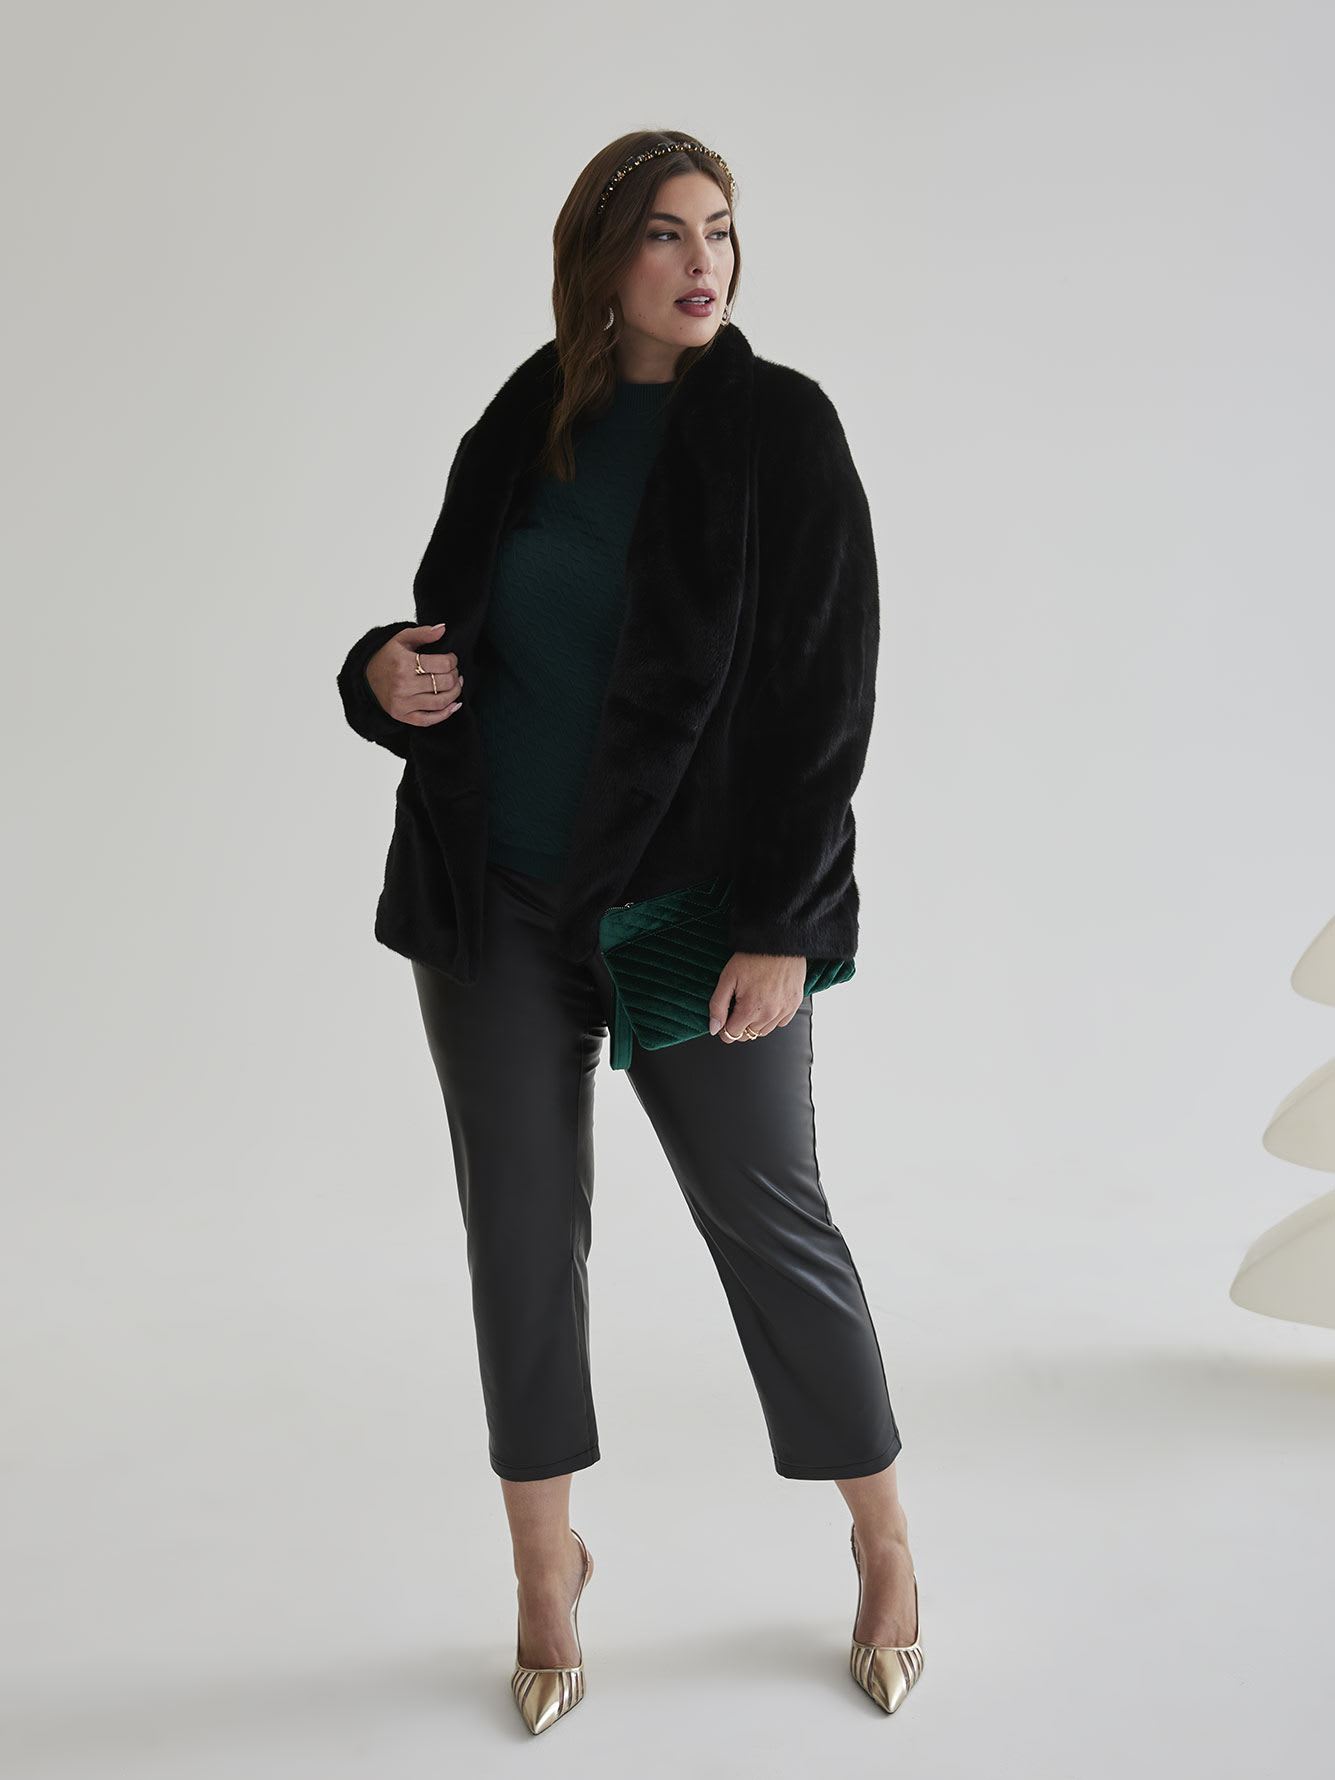 Long-Sleeve Sweater with Cold Shoulder - Addition Elle